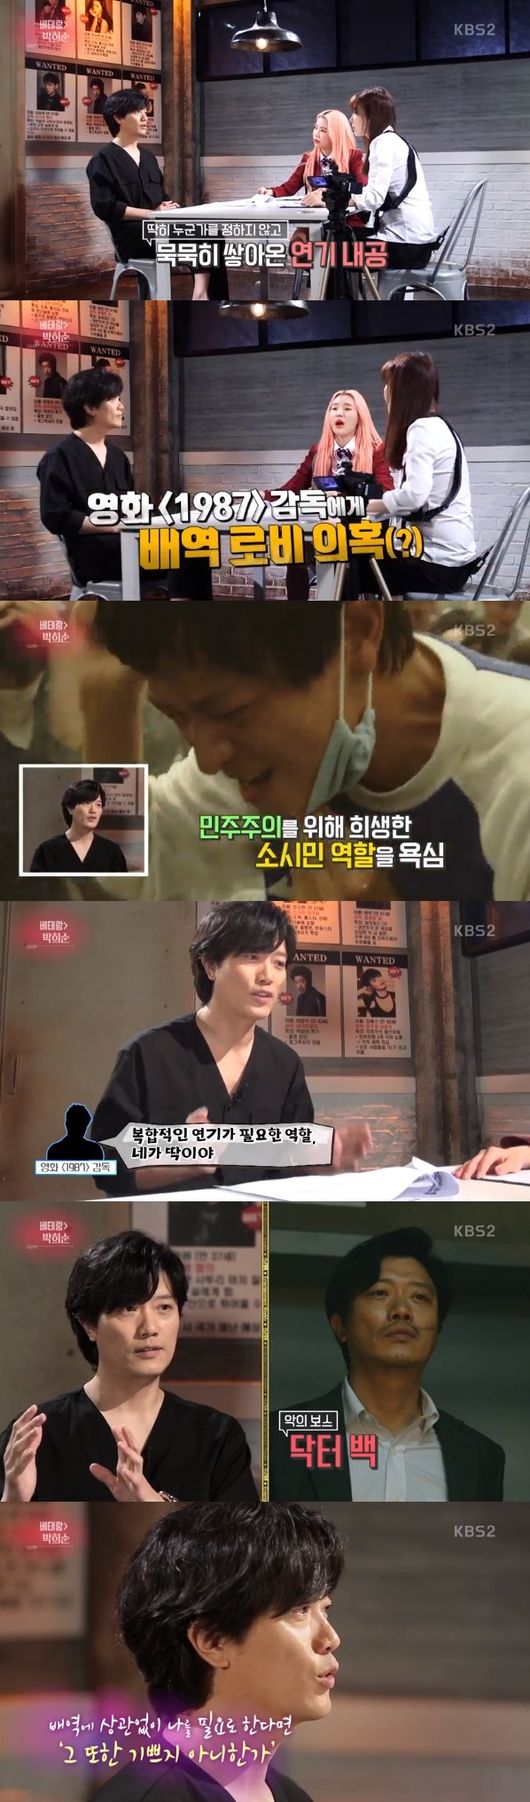 Jang Dong-gun ranked first, Gang Dong-Won ranked second, Won Bin ranked third,KBS2 Entertainment Weekly, which was broadcasted on the afternoon of the 6th, was released on the ranking of Beautiful Men and Women 2018 of the Century Loved by Koreans.First, the meeting with the four DJs who are responsible for KBS radio was revealed.Park Eun-young, who is conducting Park Eun-youngs FMs march from 7 am, said, I am glad to quit Entertainment Weekly and interview for the first time.Park Eun-young said, I hope I can say hello to the news of the marriage next time. The production team teased, Ive been talking about it for five years.Claudia Kim, who is in charge of Raising the volume of the evil musician Claudia Kim from 8 pm, said, It was a radio DJ that I wanted to do before I died.As a guest, Seungri, Kim Saraon, and Black Pink came out. The guests I want to invite are close and cute. Kim Seung-woo, Jang Hang-jun, who is responsible for 4:00 pm to 6:00 pm, is breathing with Mr. Radio of Kim Seung-woo Jang-jun.Director Jang Hang-jun said, The guest I thought would be Kim Nam-joo. Kim Seung-woos wife was mentioned.Kim Seung-woo said, Even if we are together, we should not be told by our wives (Kim Nam-joo, Jang Hang-jun wife Kim Eun-hee).In the Entertainment Weekly MT corner, reporter Kim Tae-jin made Samgyetang in the girl group Apink and valley.Son Na-eun put Samgyetang material in a pot for the members and showed off storm food when the finished Samgyetang came out.The middle middle bomi continued to talk, such as Na-eun has no one to lose, Na-eun Na-eun has no age, and the palm time continued using the interlude.In addition, Apink Bomi laughed as Lee Soon-jaes vocal simulation and the youngest Ha Youngs simulated Christinas vocal simulation.Apink showed the charm of beagle stone throughout the shooting, and Son Na-eun expressed his gratitude, saying, I think I can eat it delicious and work hard.The Veteran segment featured actor Hee-soon Park.On the occasion of choosing the actors path, Hee-soon Park said, I was in the light, and it was attractive that no one in the audience was seen. There was no role model.Hee-soon Park, who has played a strong role in Seven Days, Kan Gi Nam and 1987, said, I wanted to play a small citizen in 1987, but the boss did not eat the seeds.He said he wanted me to play a complex villain. At that time, I went to school in Namsan and smelled of tear gas, and my uncles searched for it.Hee-soon Park, who recently appeared in Park Hoon-jungs Witch, said, I work on the third time, not persona, but I am an easy actor to turn back.I think Im casting because Im easy to write. He laughed and said, I took on the boss character of evil in the play.I think it is also a pleasure if I need me regardless of the role. In addition, the ranking of Beautiful Men and Women 2018 of the Century Loved by Koreans was released.This ranking is the result of a survey of 1,034 adults and men aged 19 and over nationwide for a total of five days from May 17 to 21, 2018 at the KBS Broadcasting Culture Research Institute.Park Seo-joon, who is in the 30th place and is in the Why is Kim Secretary?, Choi Soo-jong, who boasts a beautiful beauty in the 29th 50th, Kang Seok-woo, 28th aid flower, Lee Min-ho, Former major league pitcher Park Chan-ho, 21st place Leeds Shin-shin Song Seung-heon, 20th place Gutti,19th place 70th, original tough guy Choi Bul-am, 18th place is soft man Ahn Sung-ki, 17th Korean star Kim Claudia Kim, 16th fantasy soccer star Anne Ahn Jung-hwan, 15th place Yonsama Bae Yong-joon, 14th place Sogangji So Ji-seop, 13th place David Sangsu, 12th place 60th sculptured man Namgungwon,The man who wants to own 10th place, Song Jung-ki who shook 9th place Asia, Jo In-sung, 8th place aid sculpture, 7th place Koreas Alain Drong Kang Shin Sung-il, 6th place Hansum Guy Daniel Henney, 5th place bogum Magic Park Bo-gum, 4th place favorite face Jung Woo-sung, 3rd place breathtaking handsome Won Bin, -Won, the top spot was named by handsome Jeong Seok Jang Dong-gun.Jang Dong-gun topped the list in the 40s to 60s, followed by 2015 and also in 2018; the beauty actor rankings will be released next week.Entertainment Weekly broadcast screen capture.